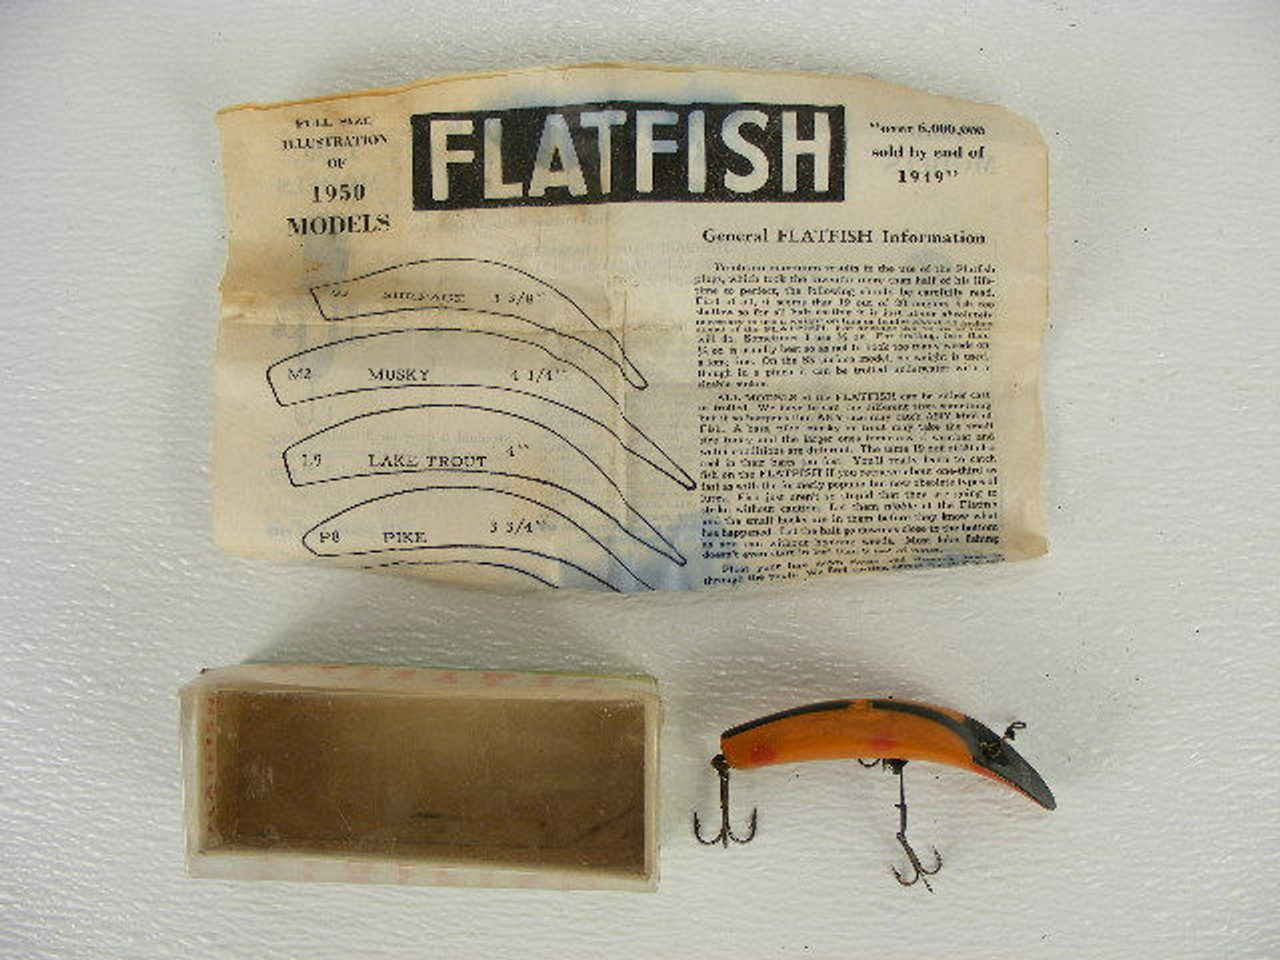 A vintage Flatfish lure in the original box from 1950. - Antique Mystique